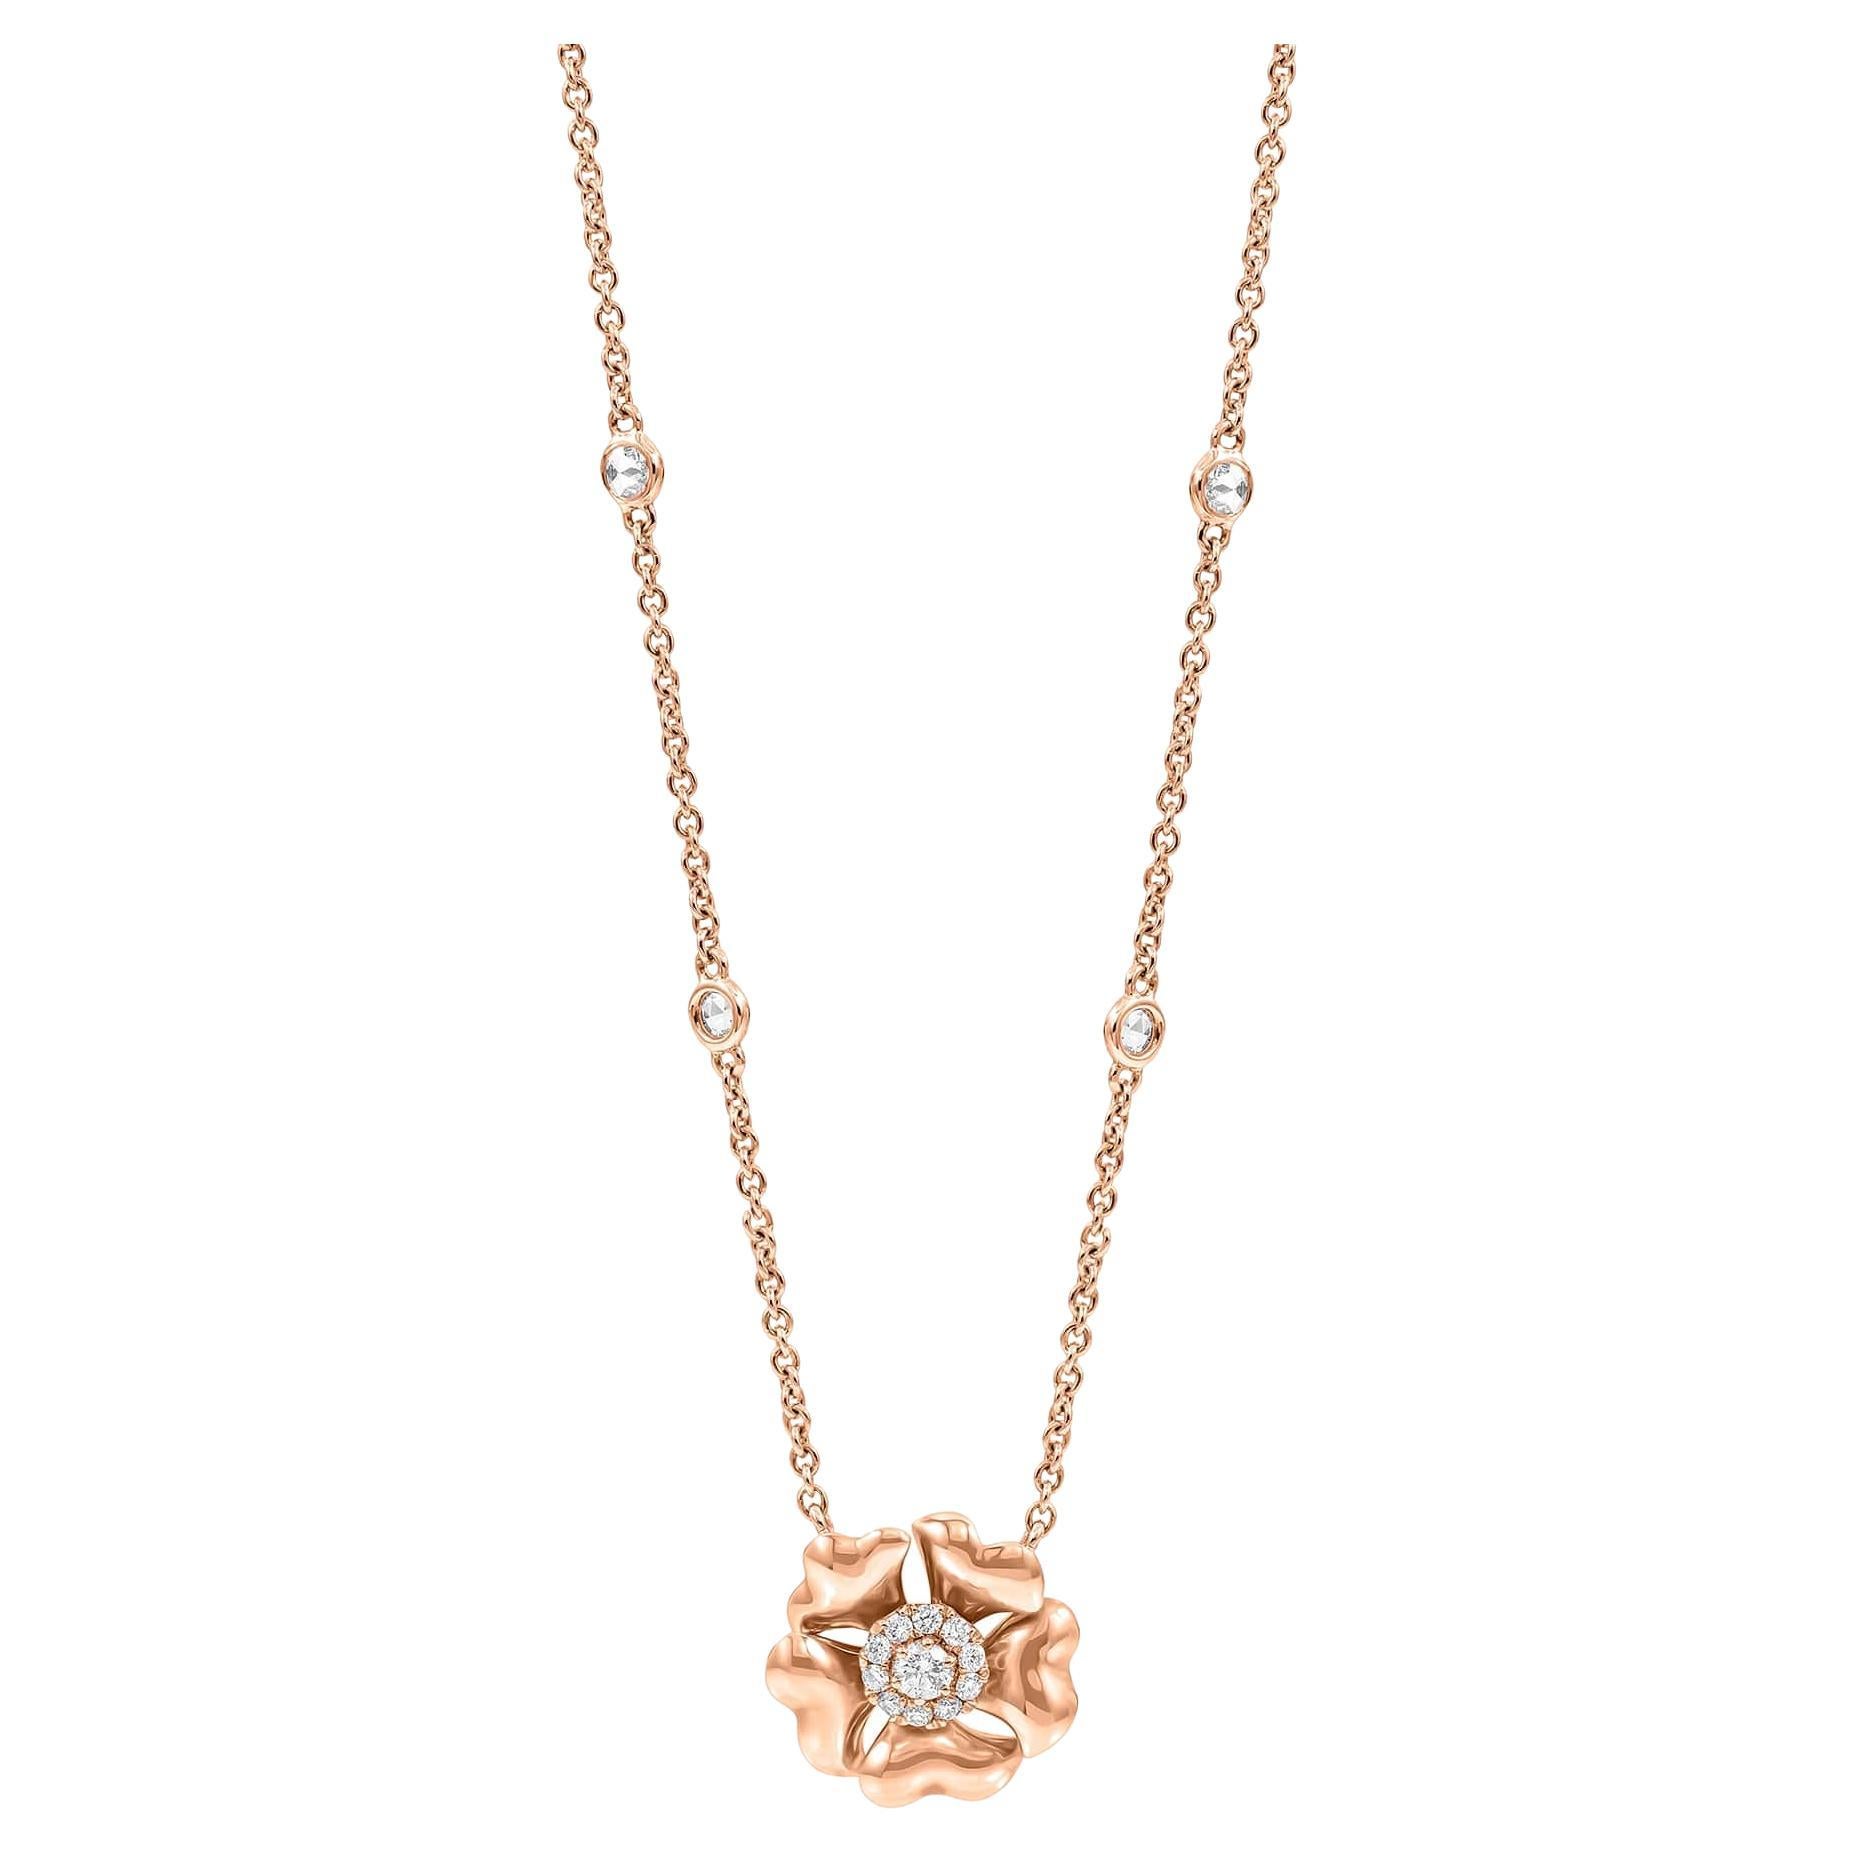 Bloom Gold and Diamond Flower Halo Necklace in 18k Rose Gold